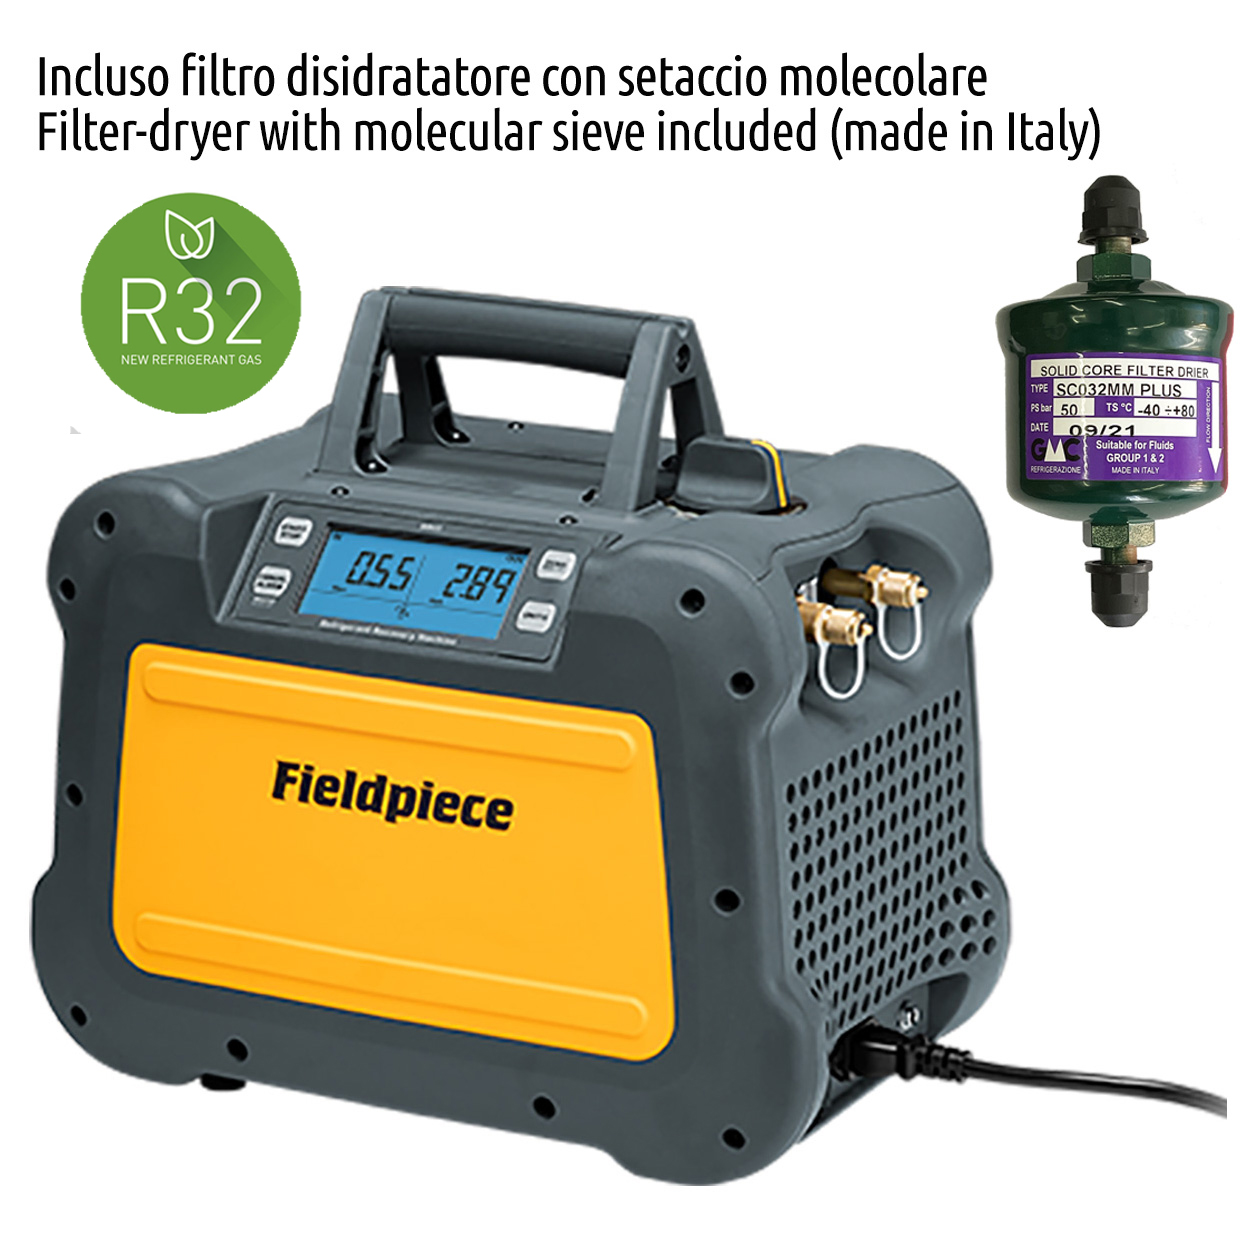 Fieldpiece USA - MR45INT Digital Recovery Machine 1 HP - 0,75 Kw with filter-dryer and adapter